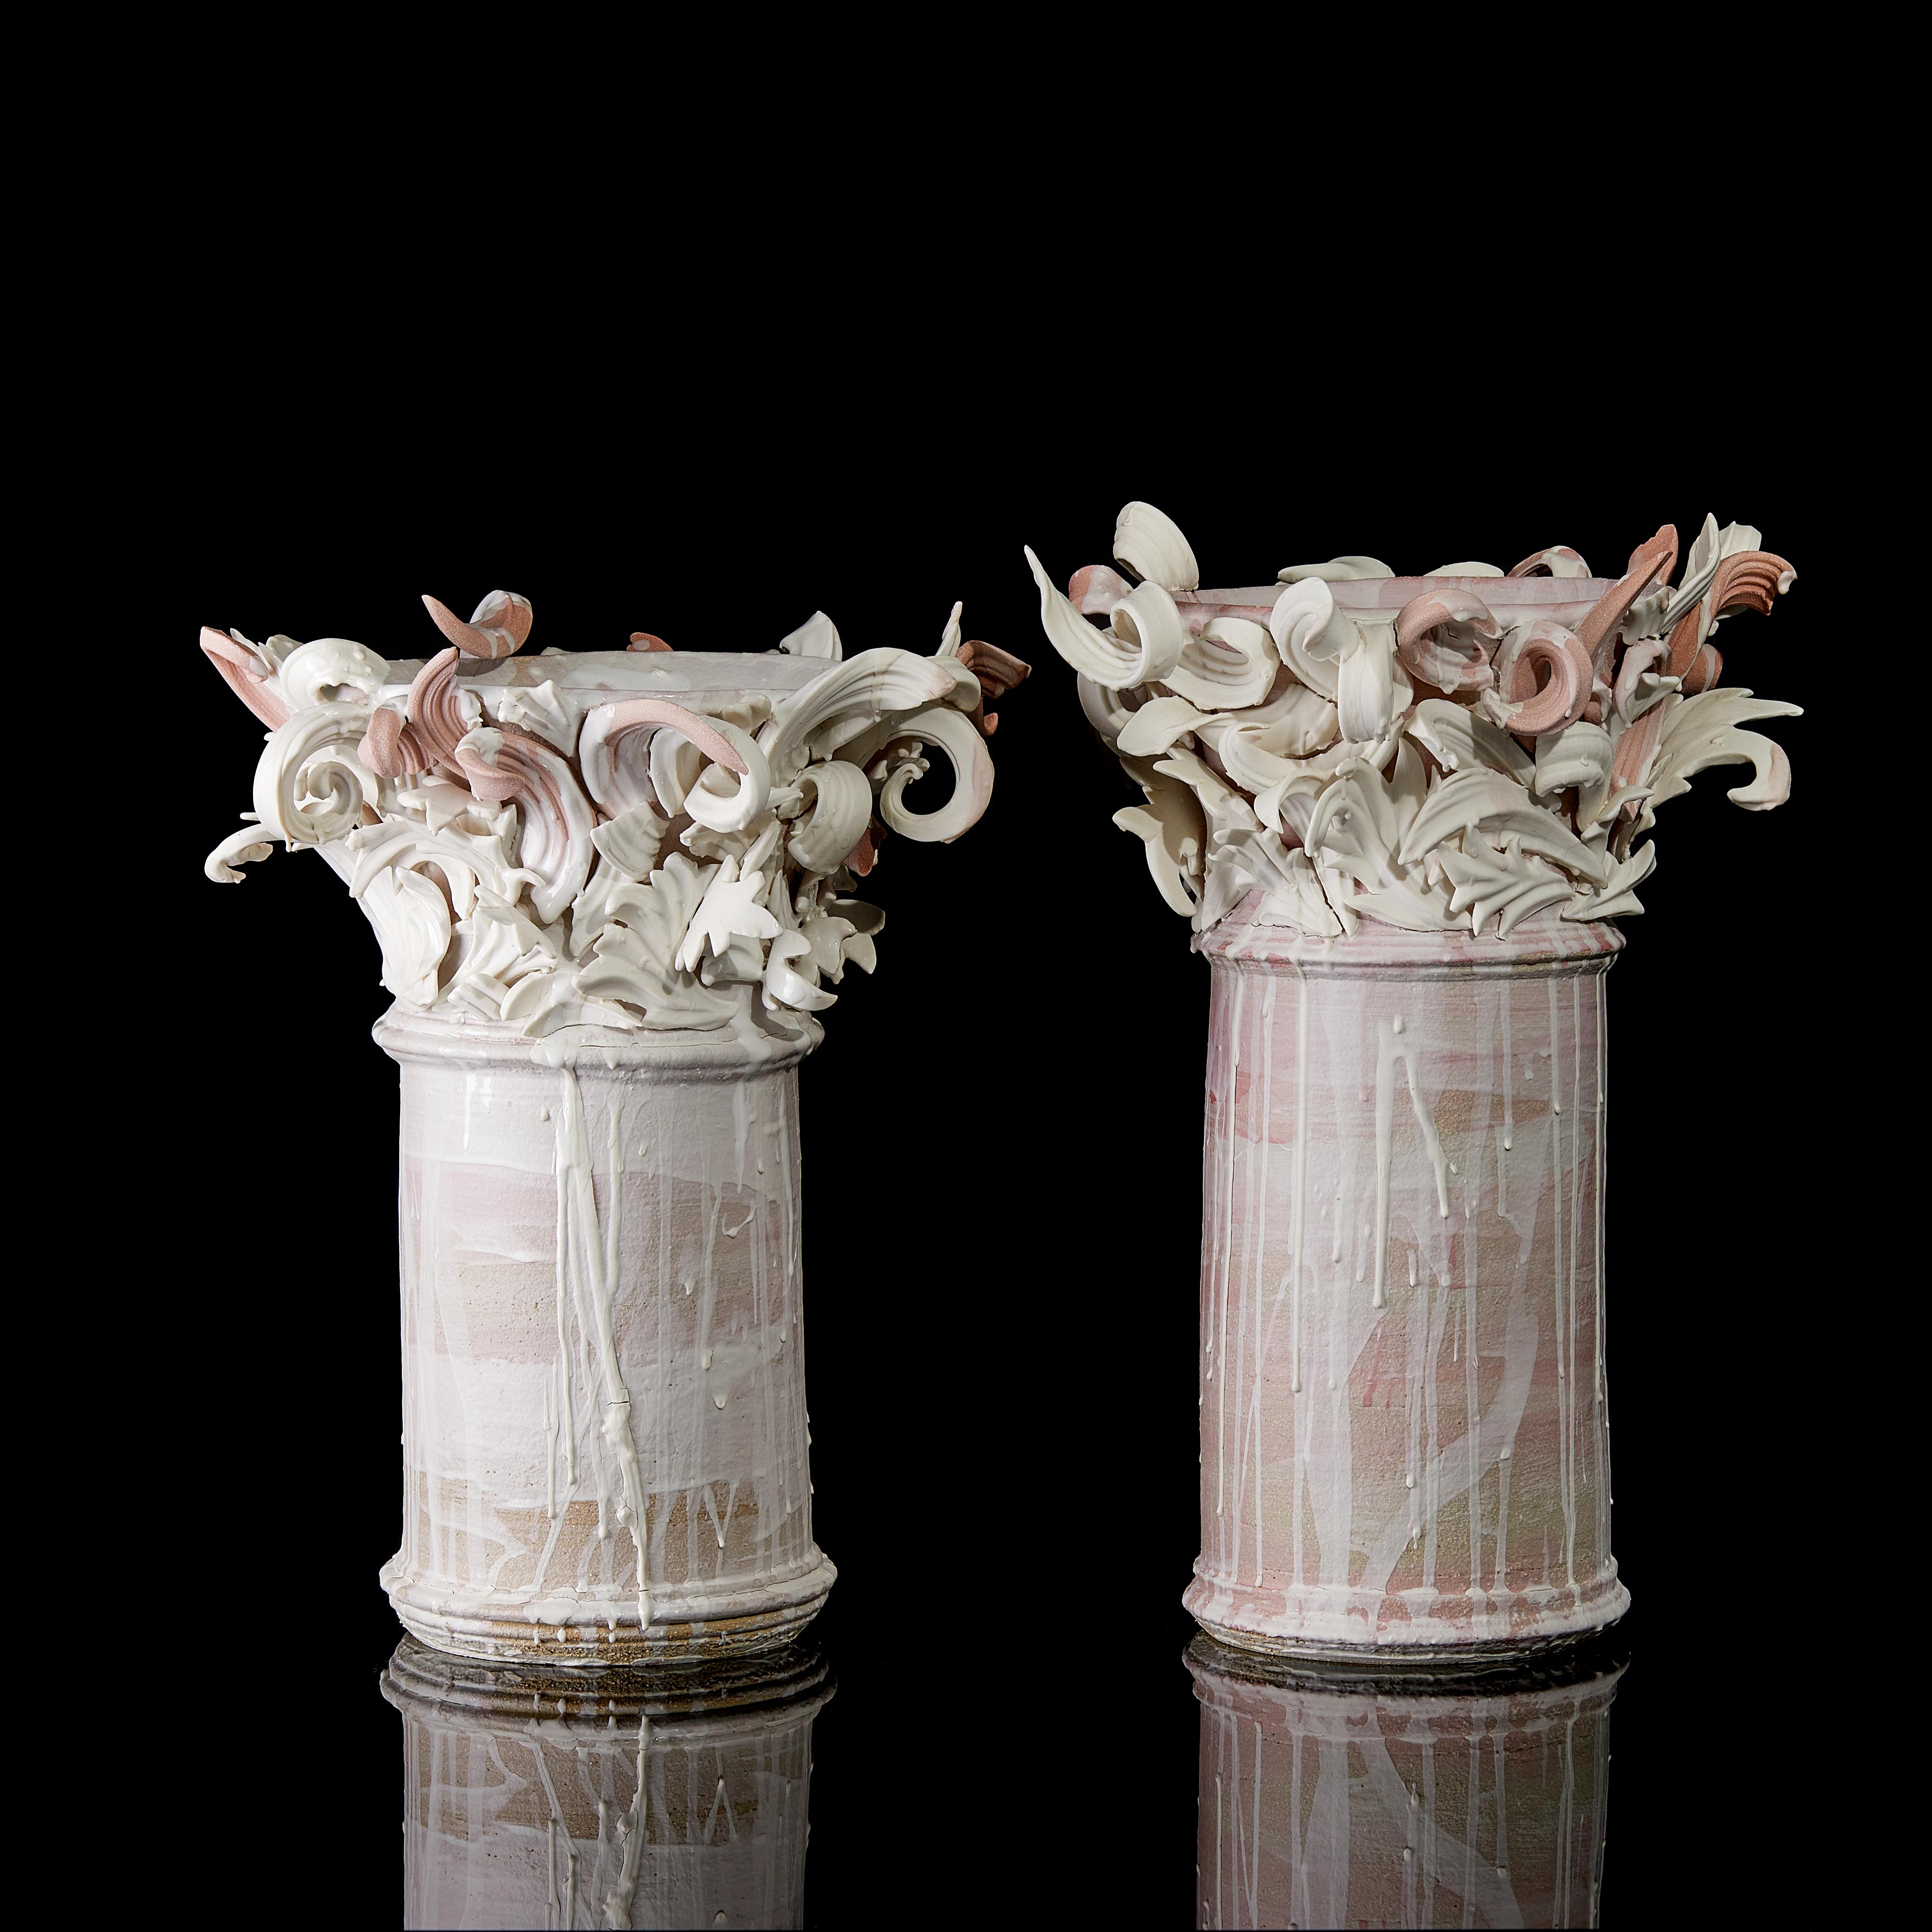 Colonnade III, a Unique Ceramic Sculptural Vase in Pink & White by Jo Taylor 8